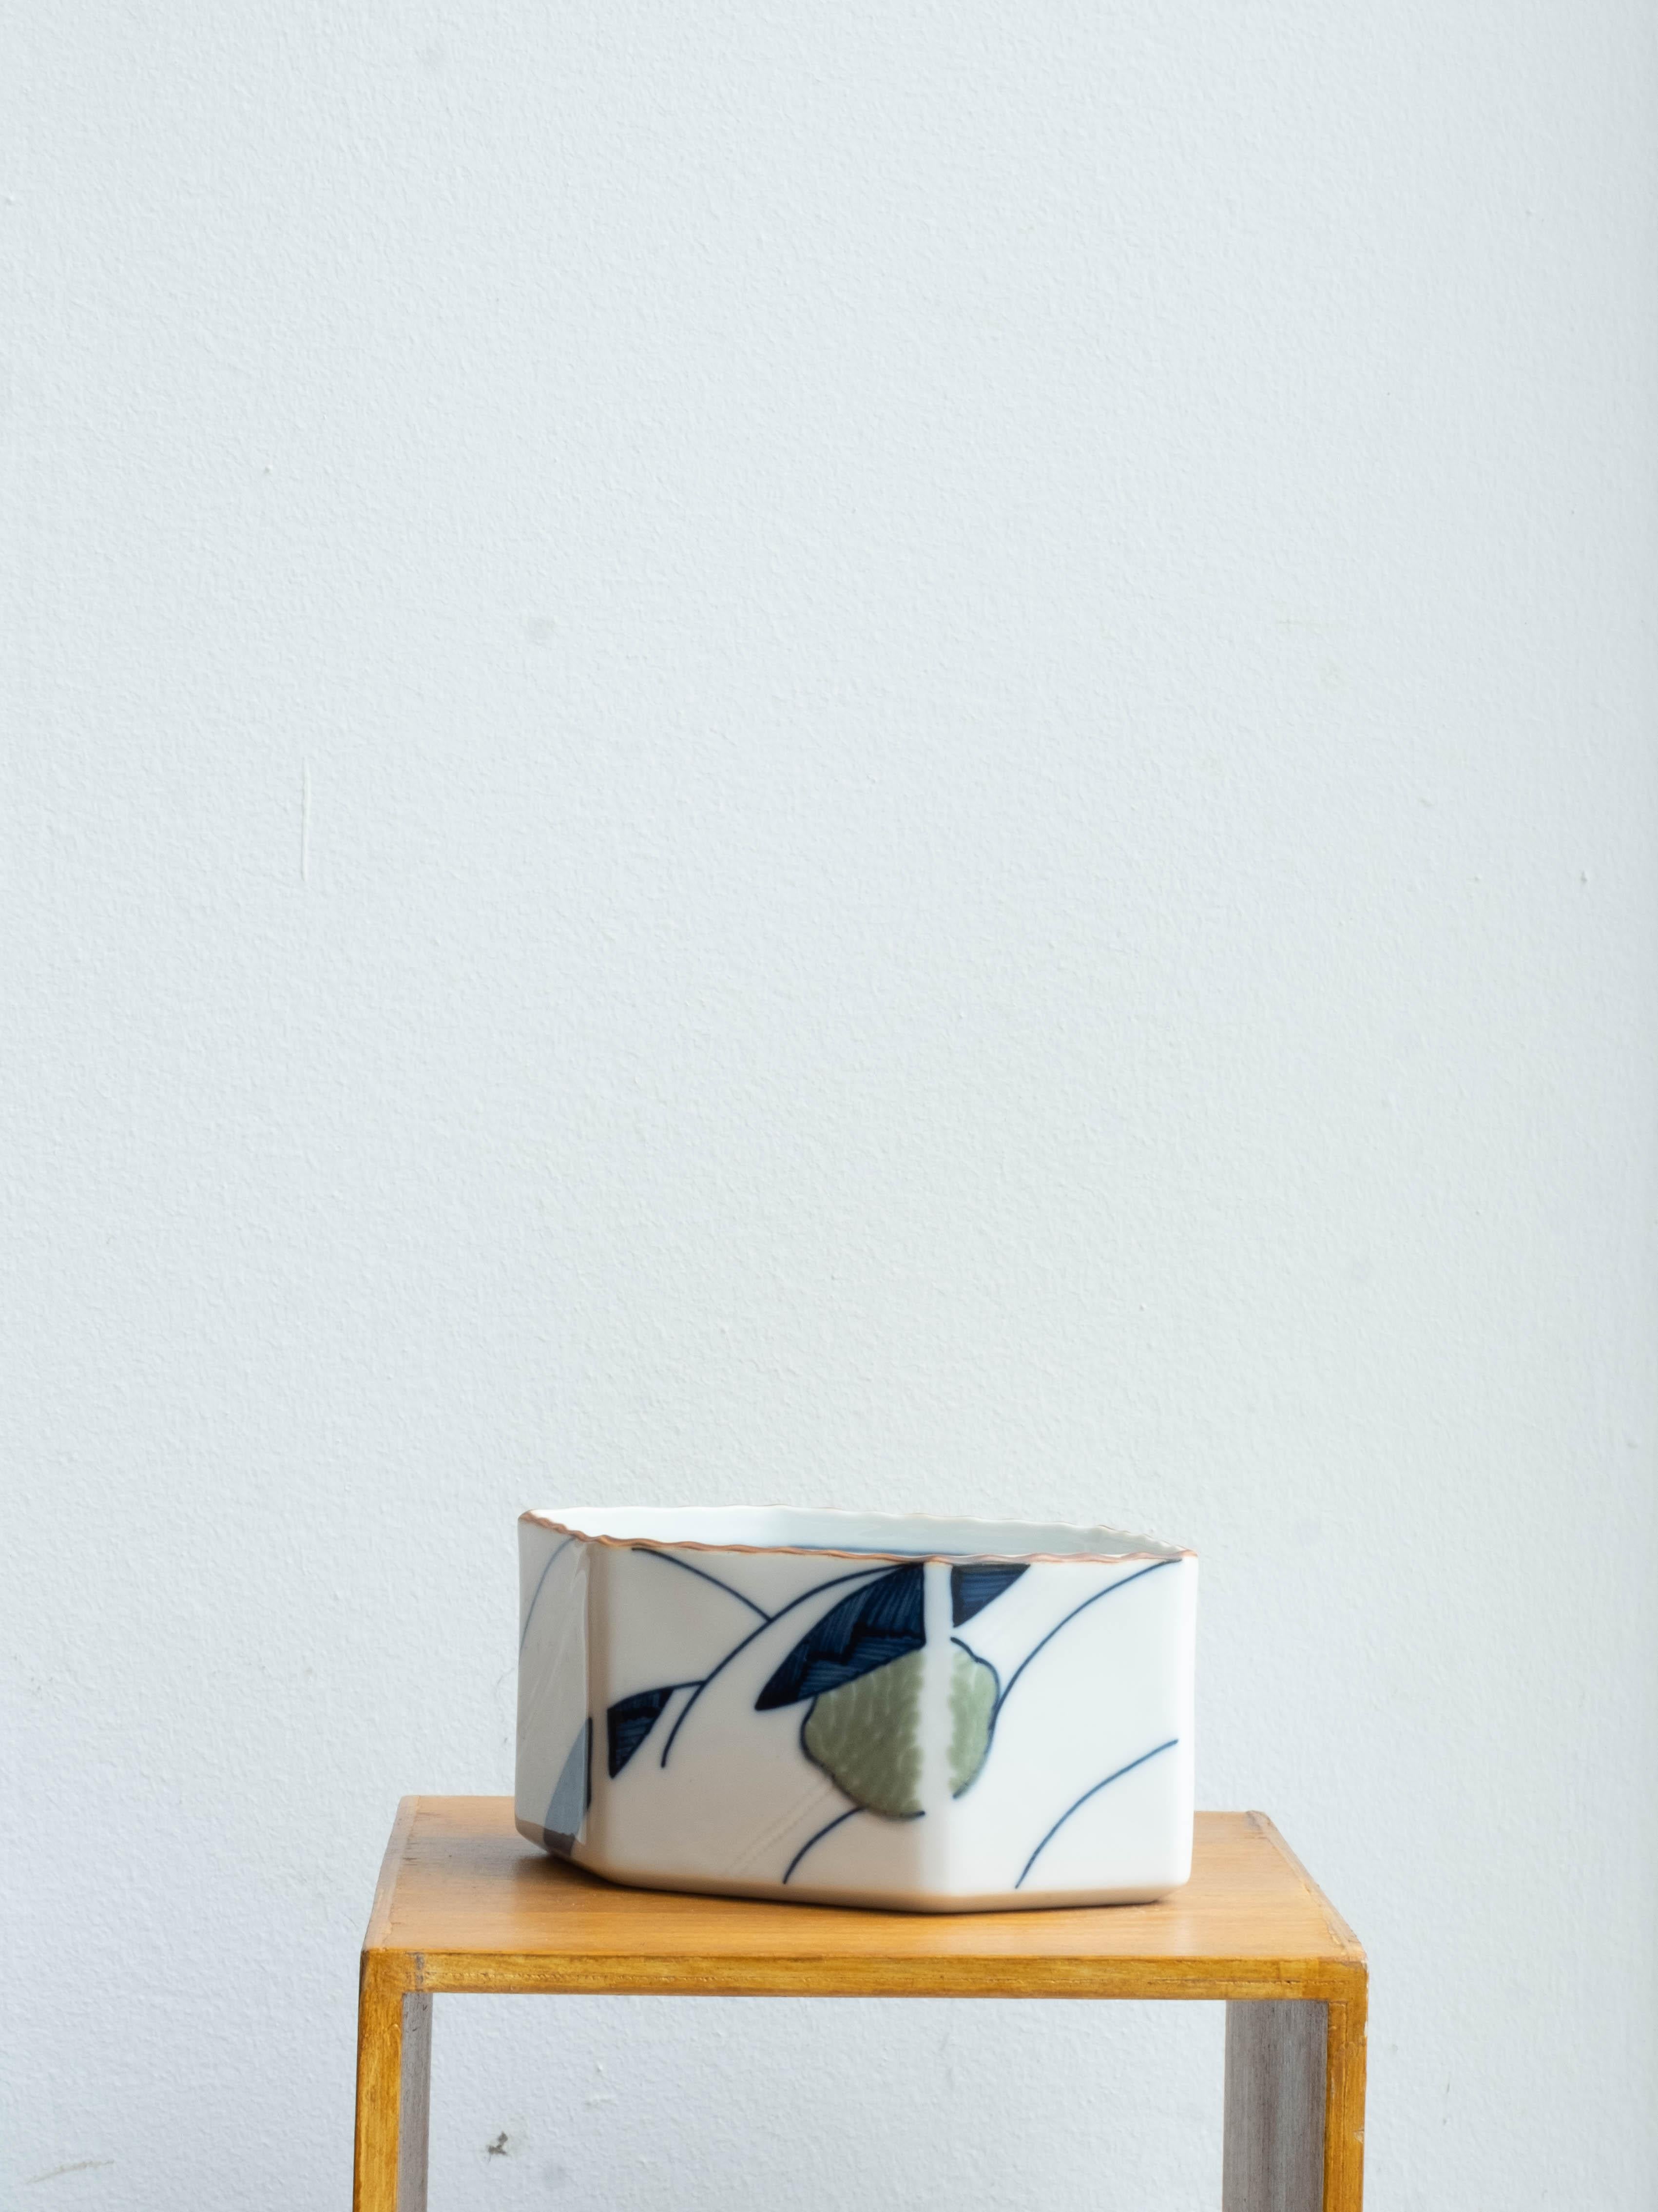 Royal Copenhagen Floreana small ceramic decorative box
This piece was designed in 1982 by Anna Marie Trolle for the Danish ceramic company Royal Copenhagen.
This small, delicate box or bowl is made of porcelain with moulded and underglaze painted